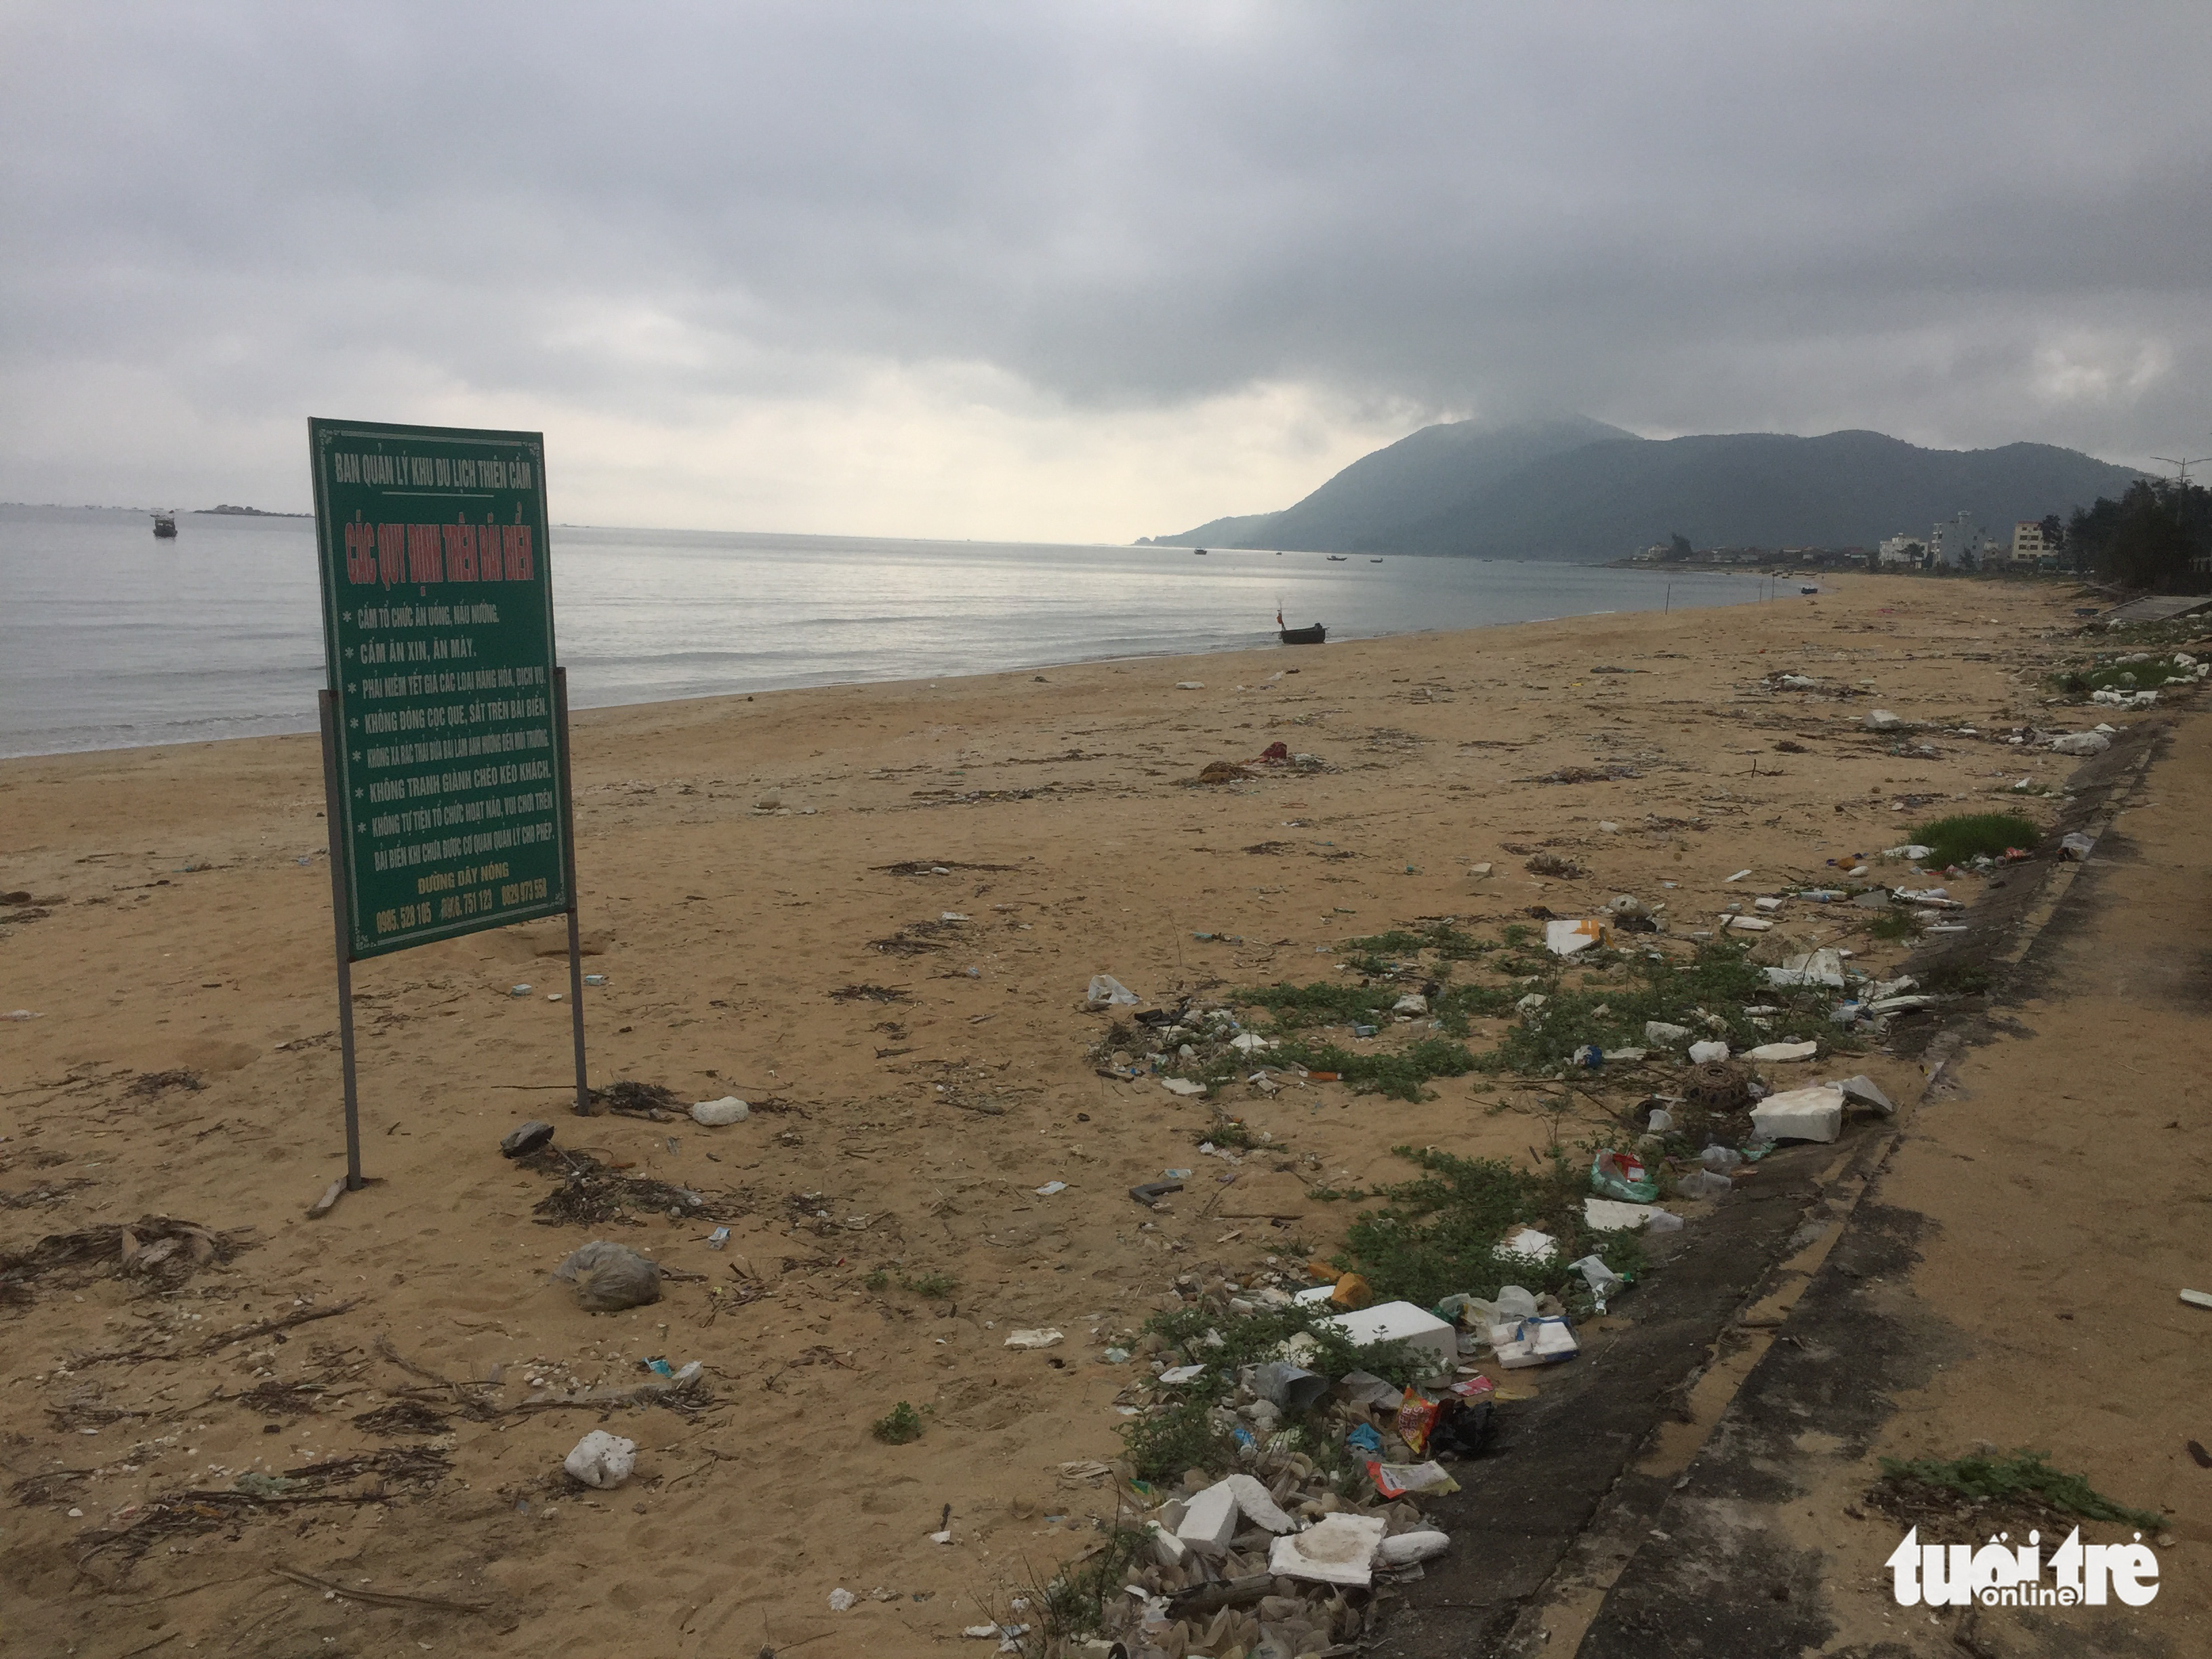 Trash is seen at Thien Cam Beach in Ha Tinh Province, March 19, 2022. Photo: Le Minh / Tuoi Tre